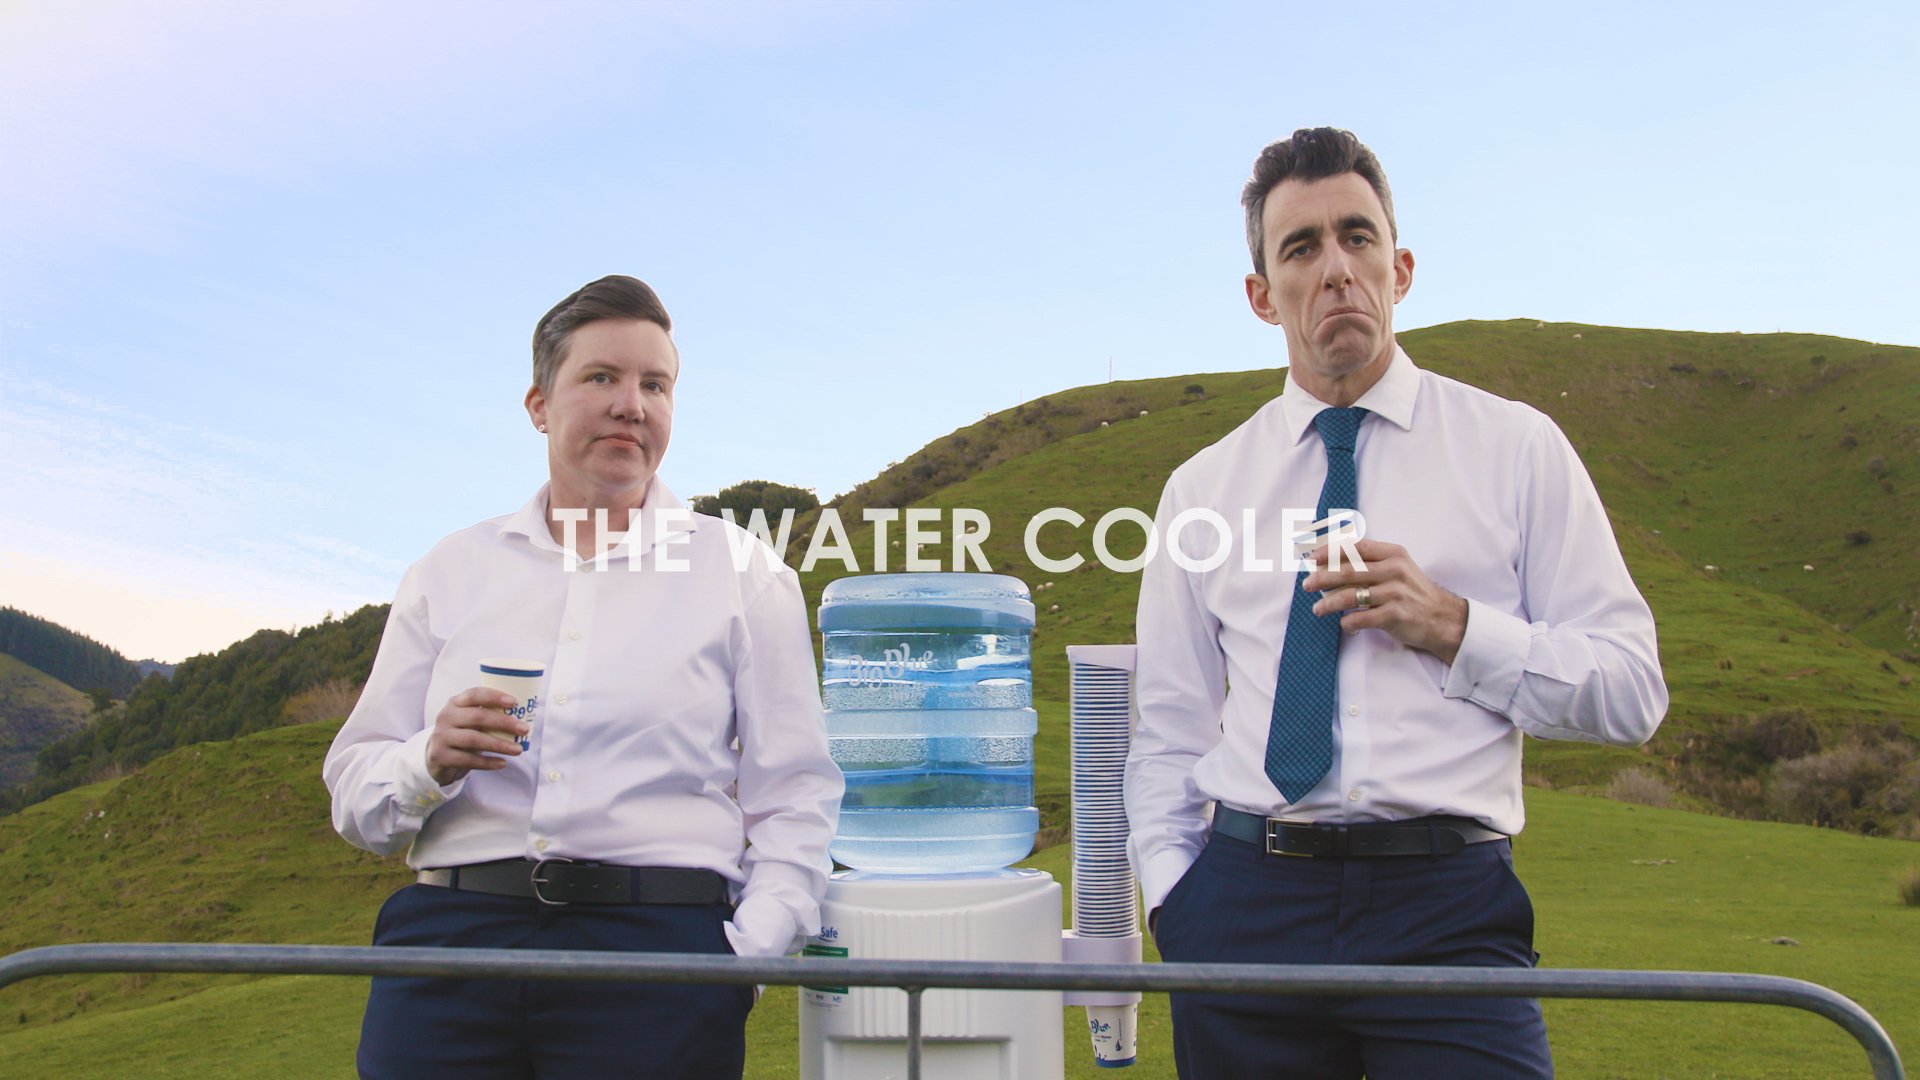 The Water Cooler - Web Series